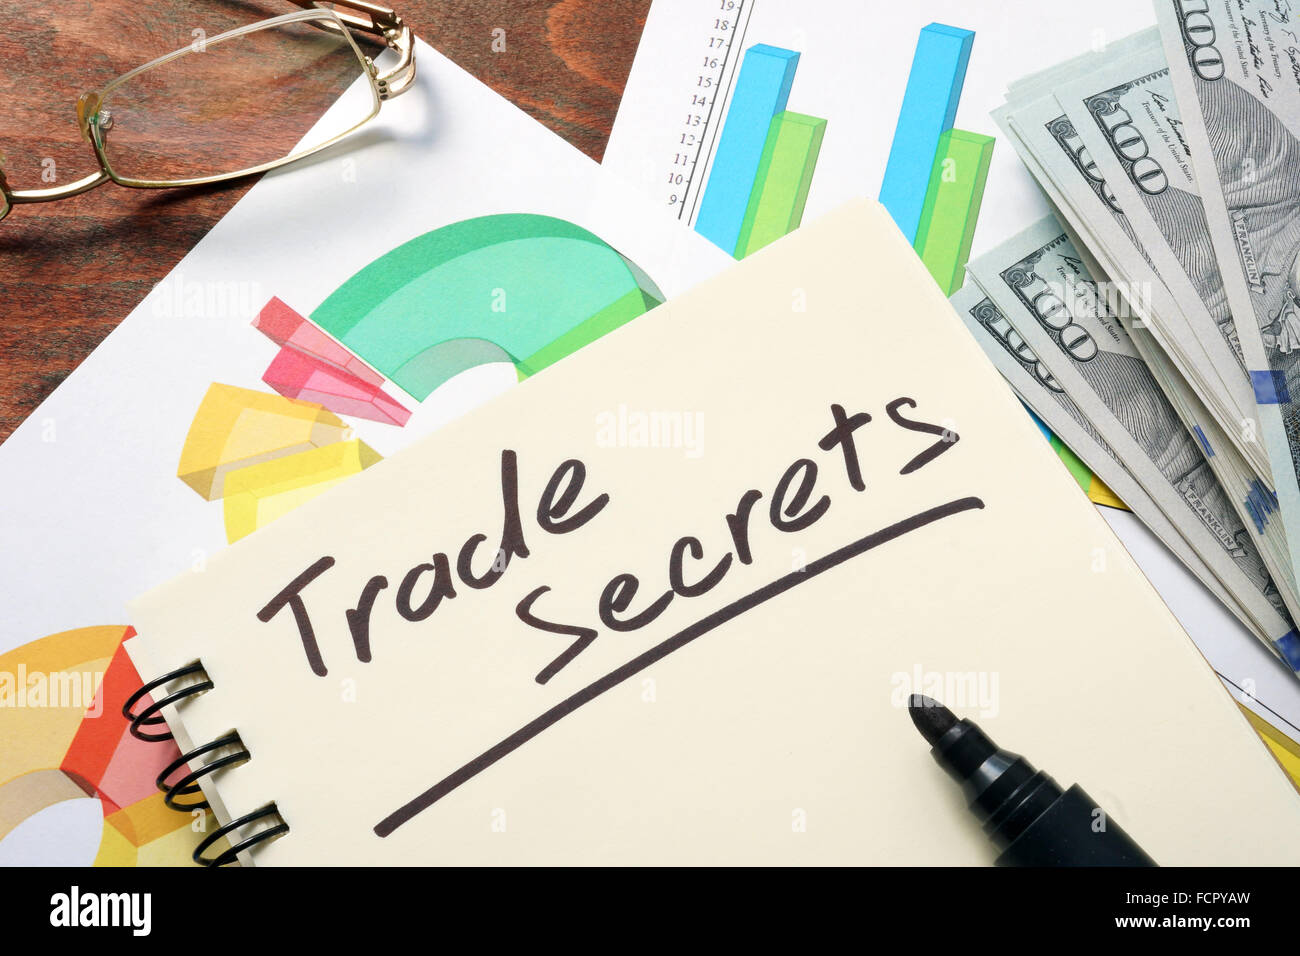 Trade Secrets  concept on a paper with charts. Stock Photo